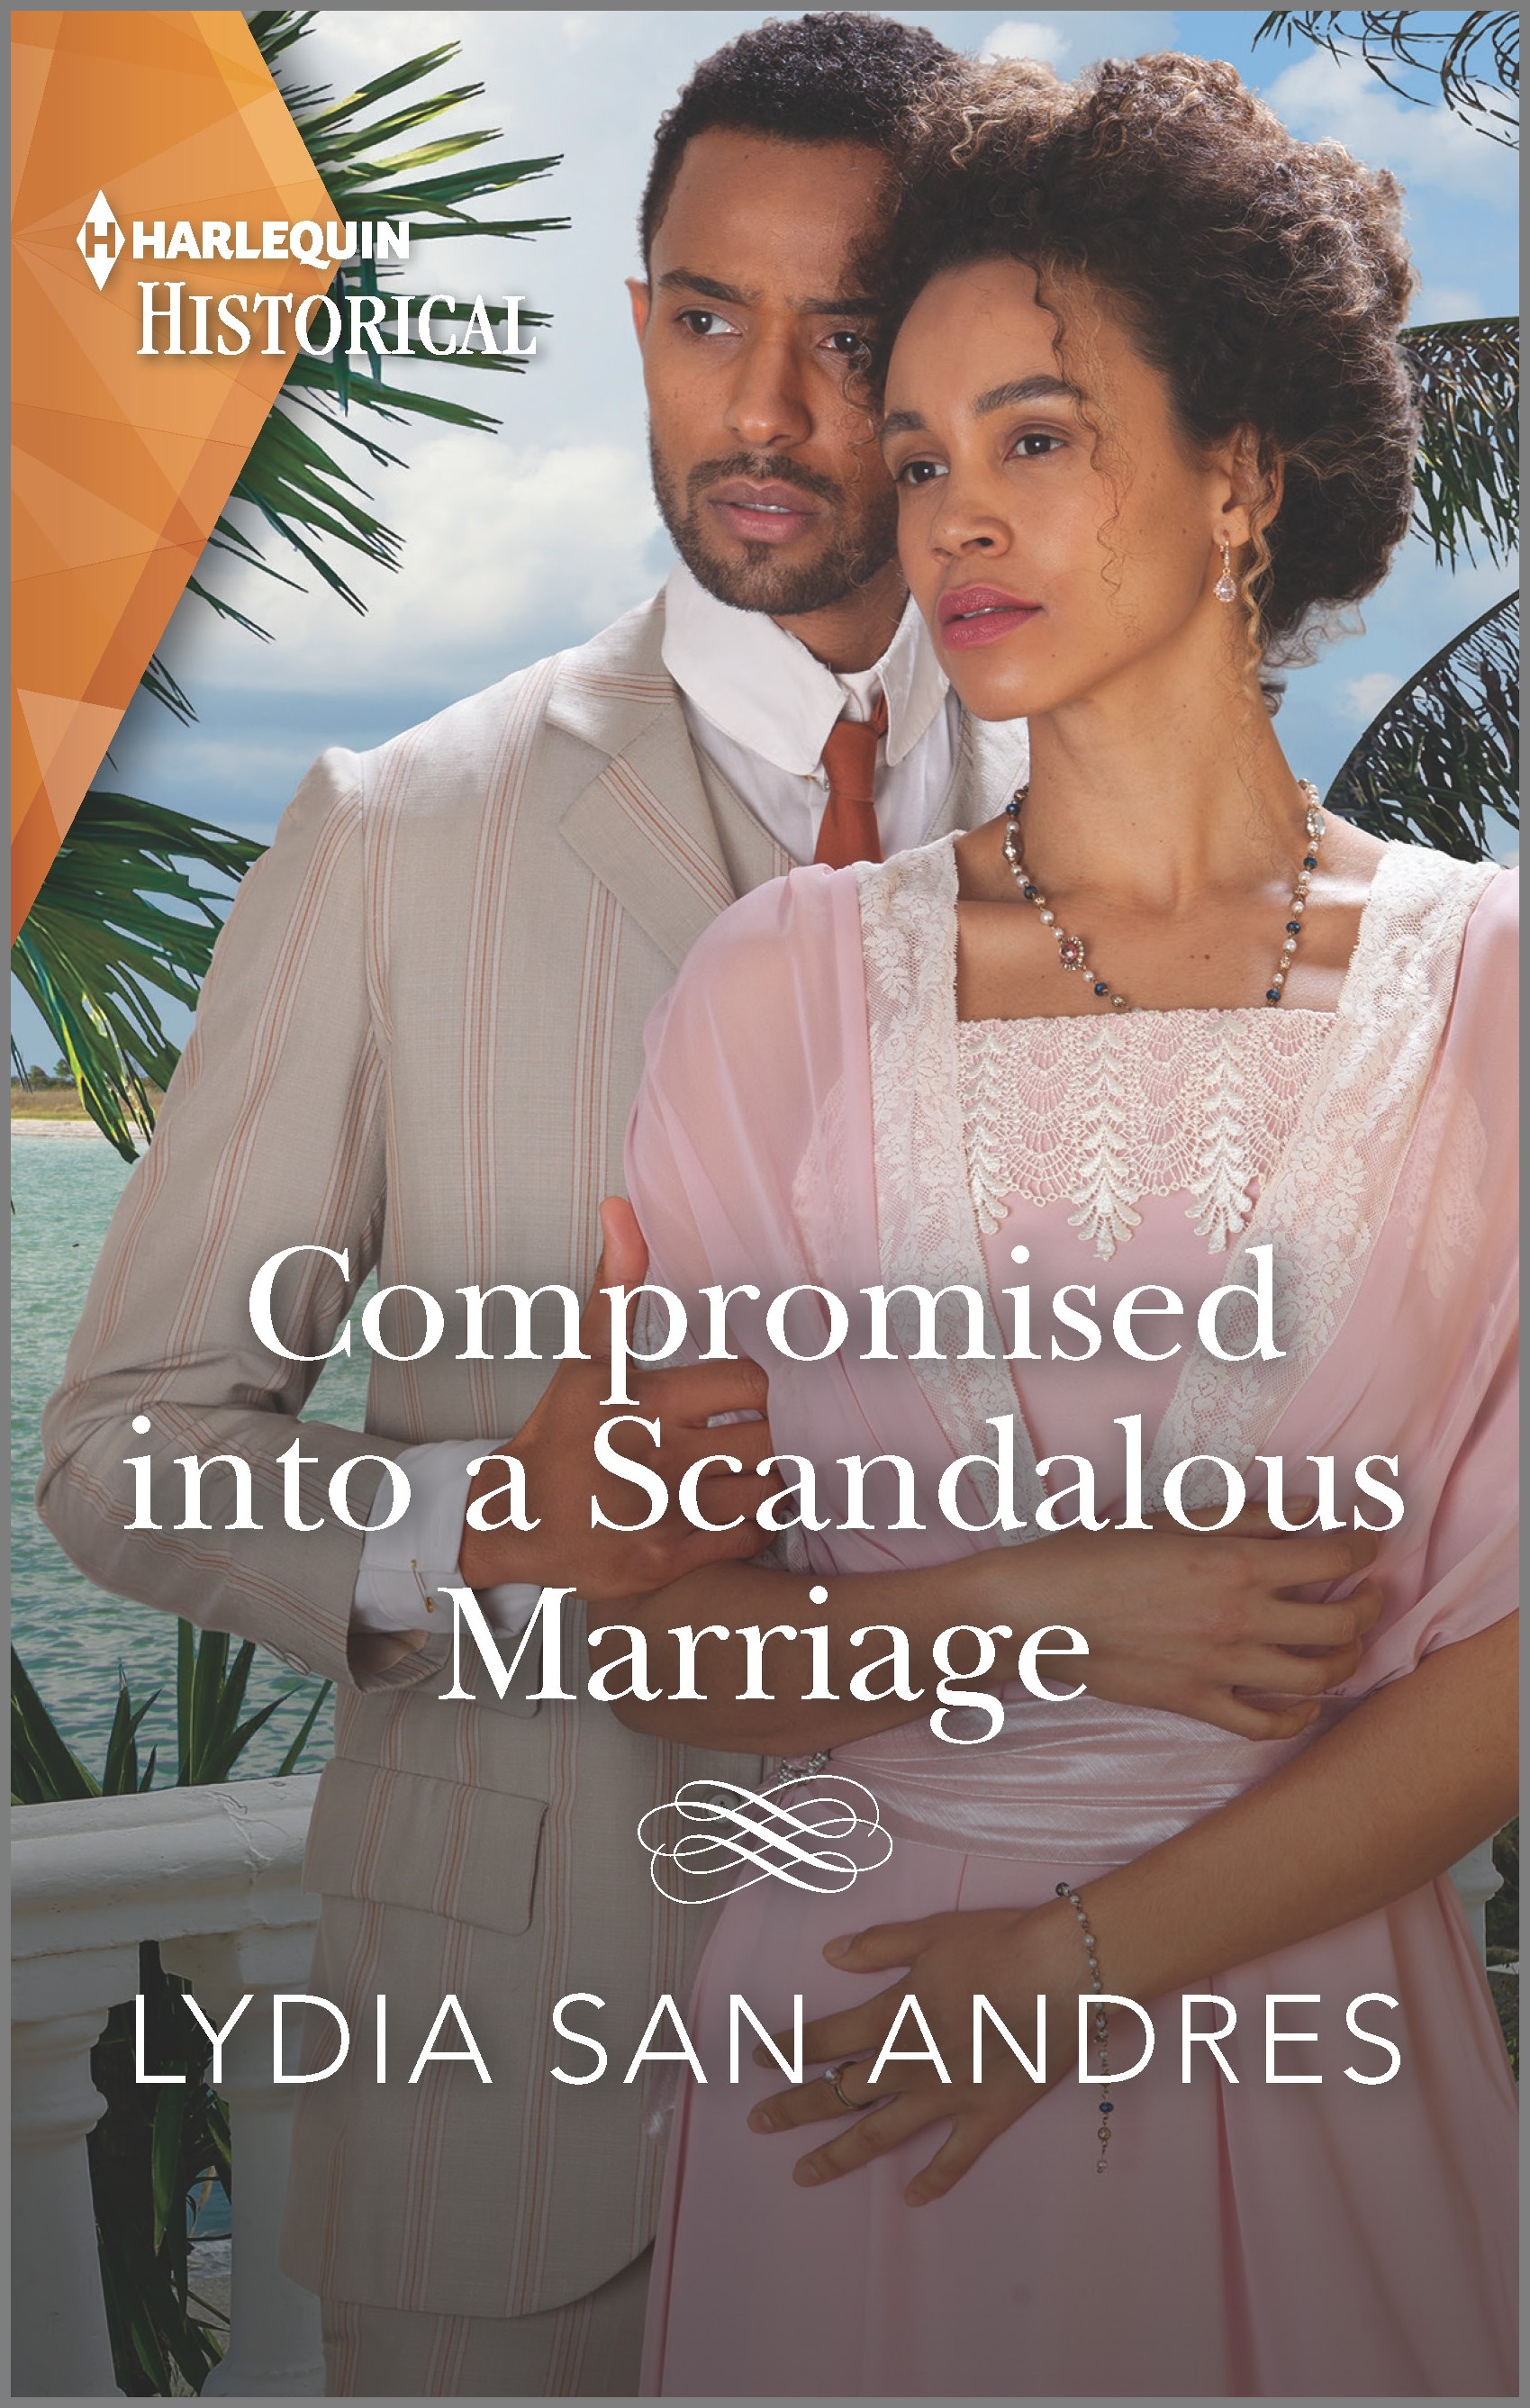 Compromised into a Scandalous Marriage by Lydia San Andres